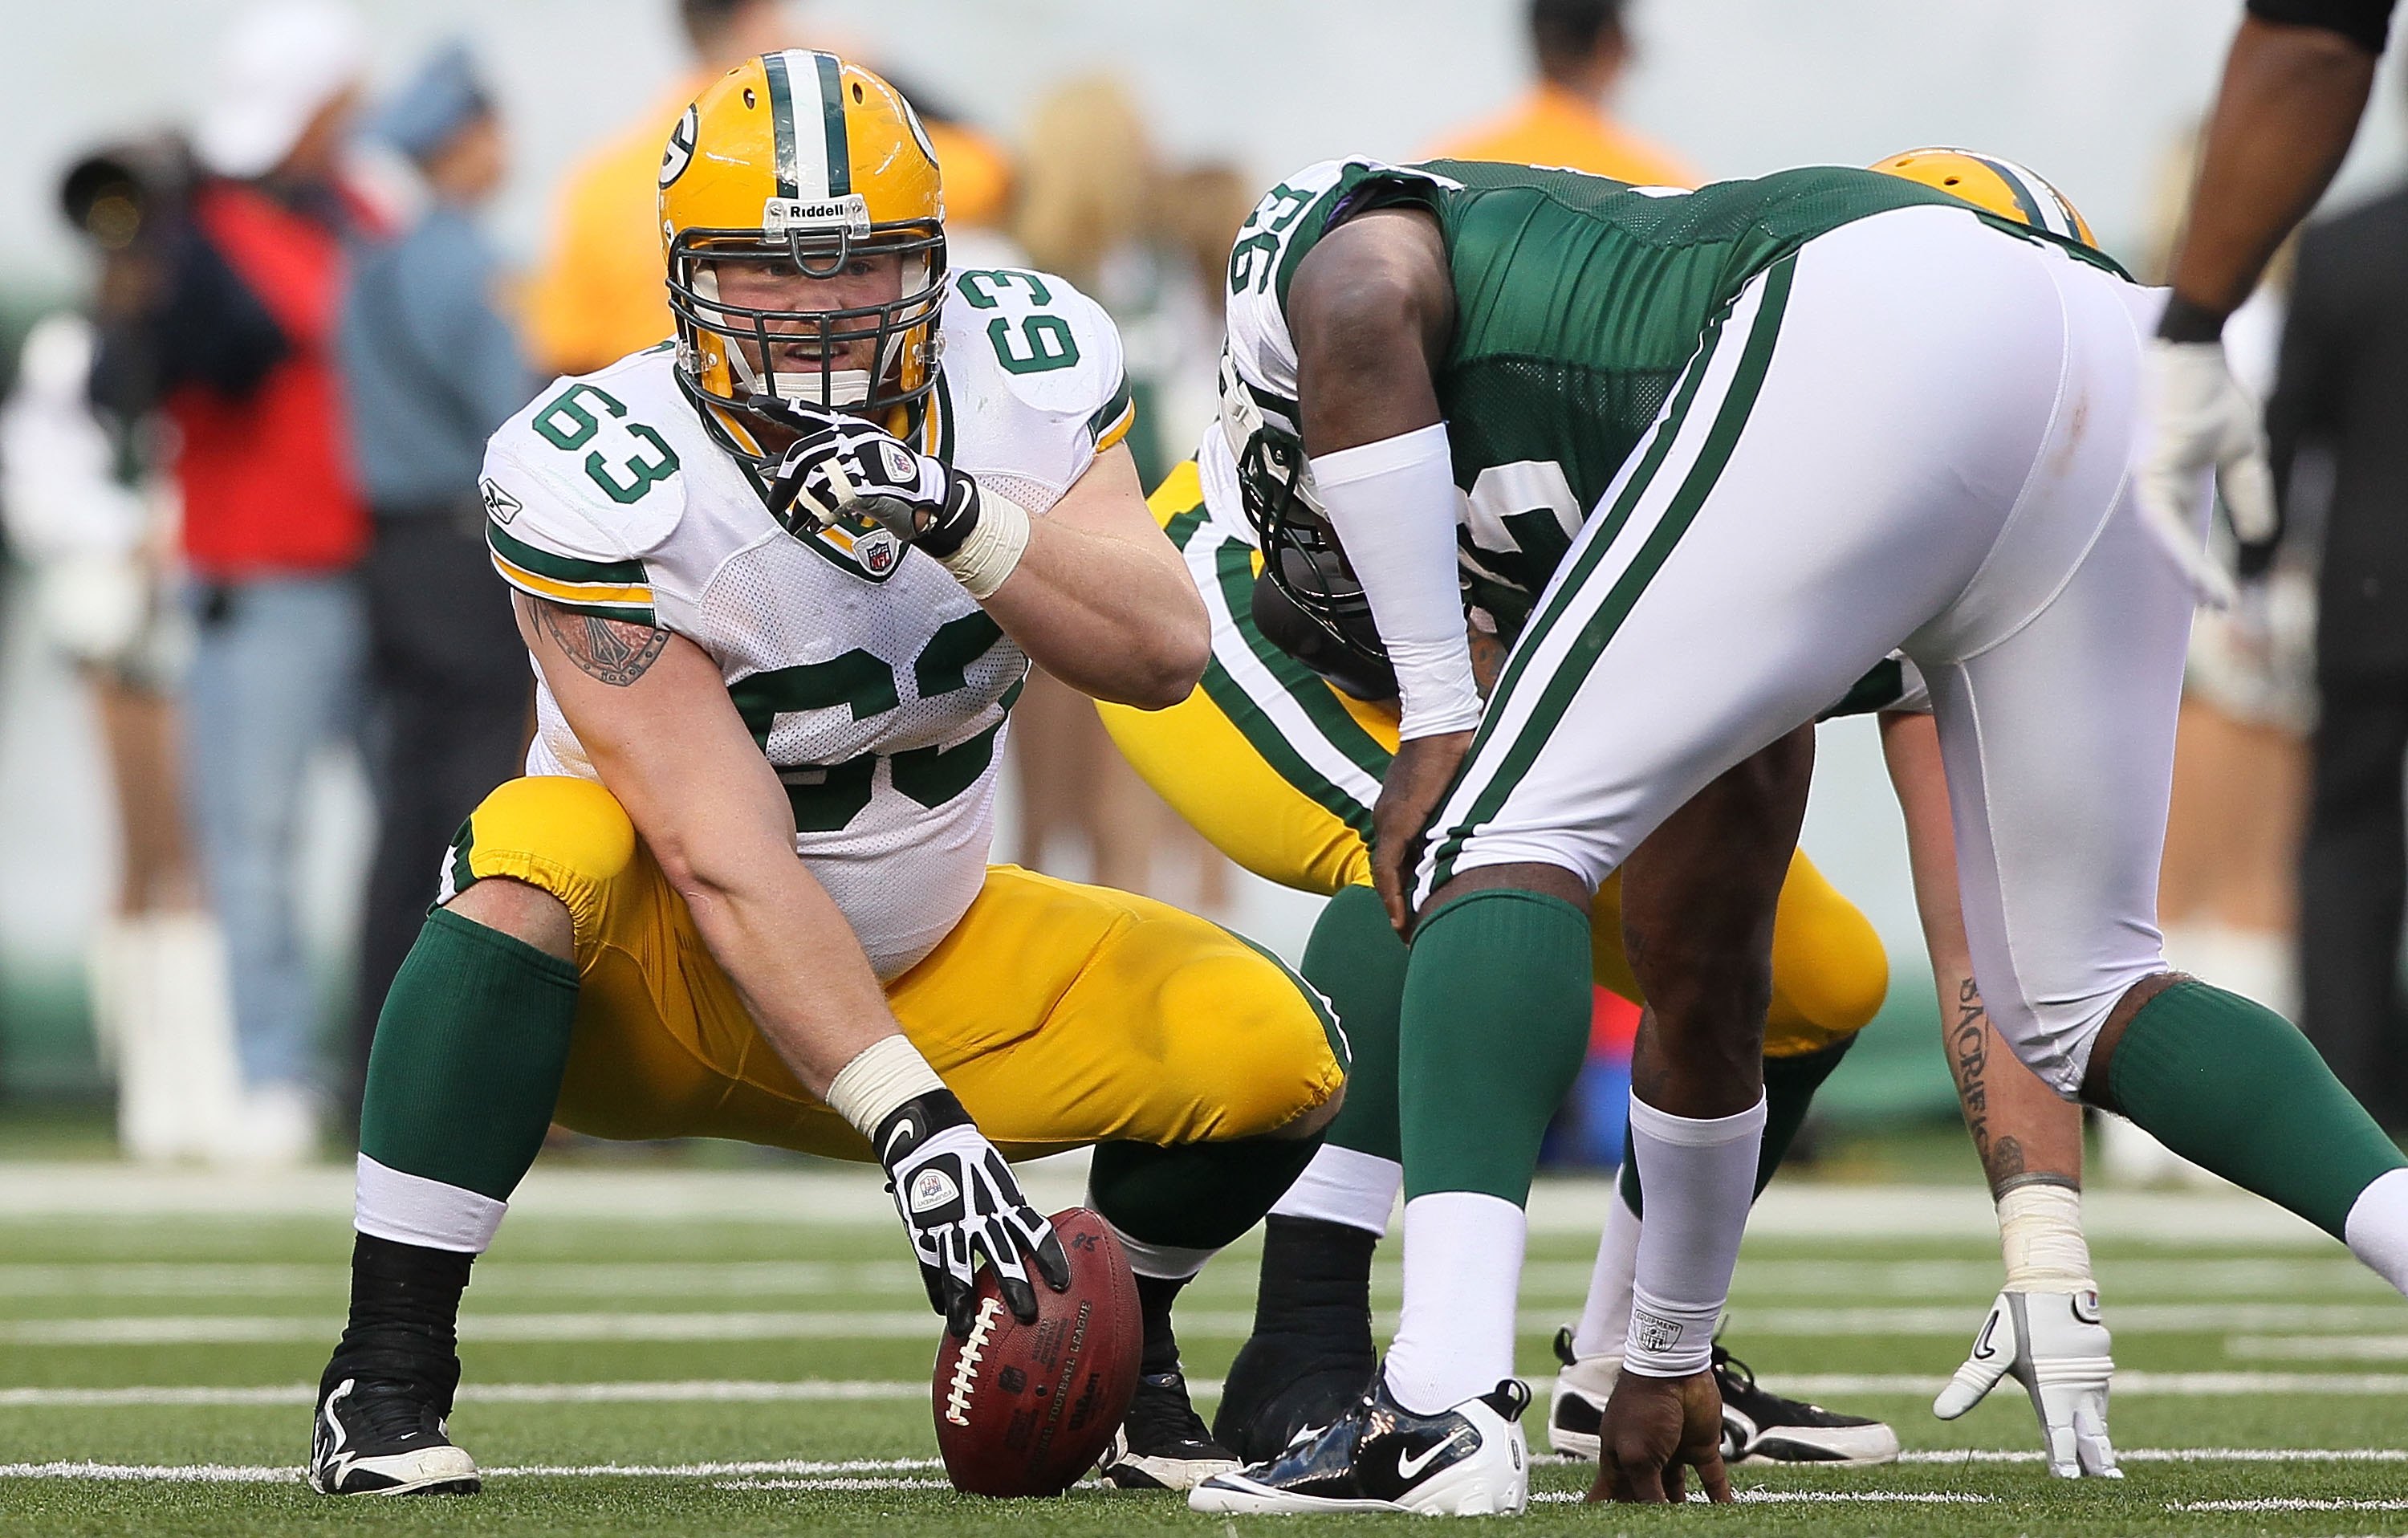 EAST RUTHERFORD, NJ - OCTOBER 31:  Scott Wells #63 of the Green Bay Packers in action against the New York Jets on October 31, 2010 at the New Meadowlands Stadium in East Rutherford, New Jersey.The Packers defeated the Jets 9-0.  (Photo by Jim McIsaac/Get